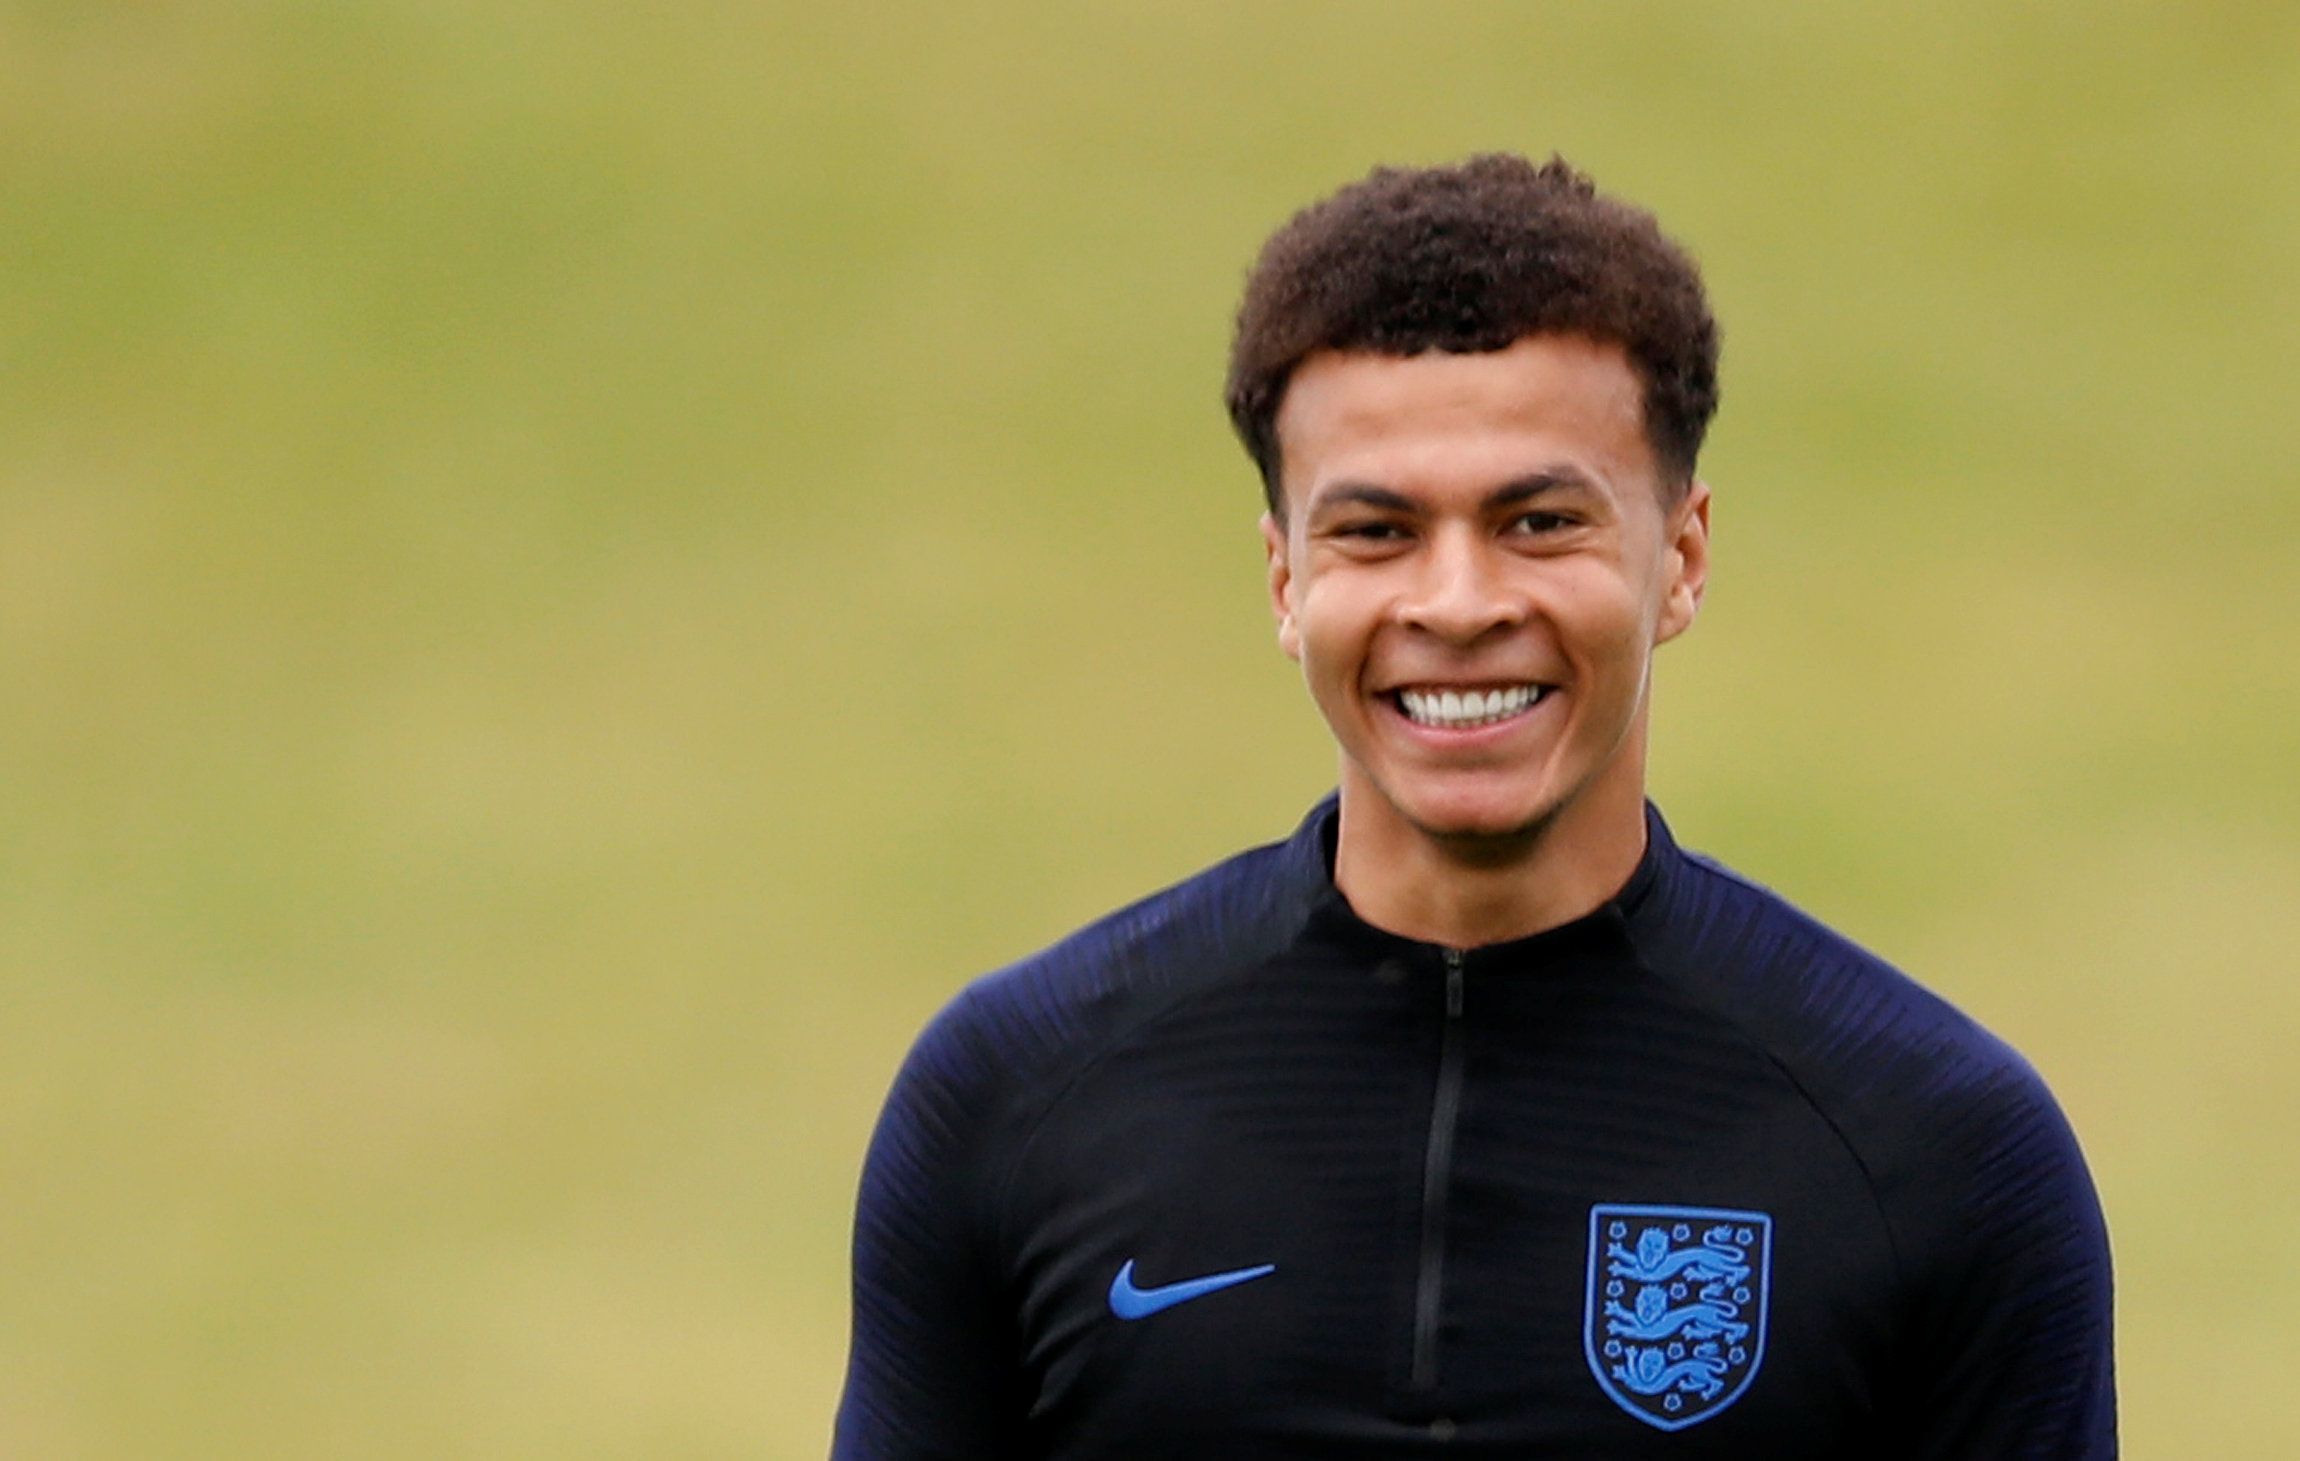 Soccer Football - FIFA World Cup - England Training - St. George's Park, Burton Upon Trent, Britain - May 28, 2018   England's Dele Alli during training   Action Images via Reuters/Carl Recine